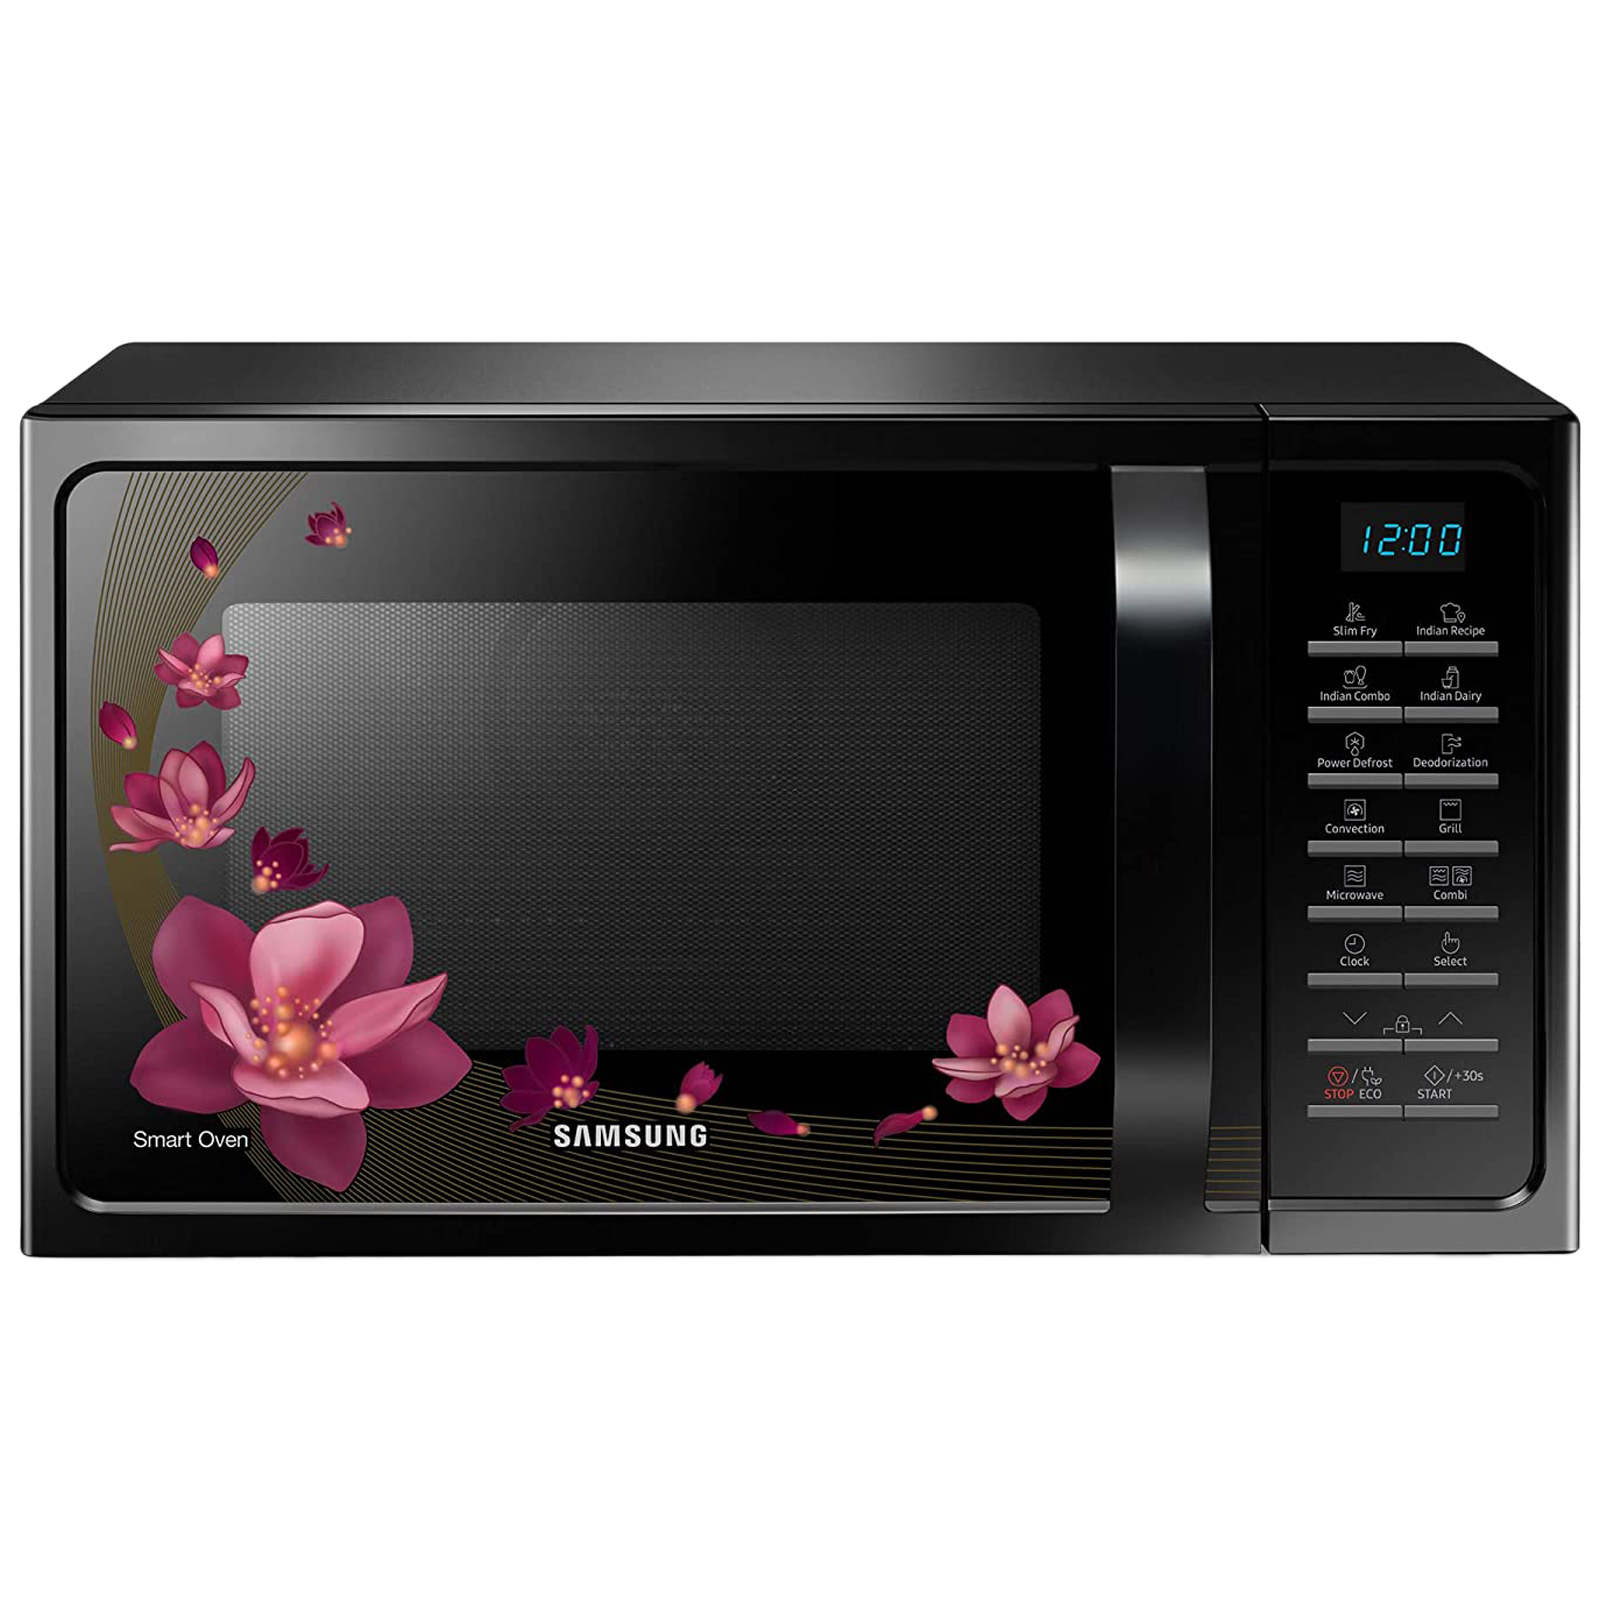 Samsung 28 Litres Convection Microwave Oven (Slim Fry Technology, MC28H5025VP/TL, Black)_1